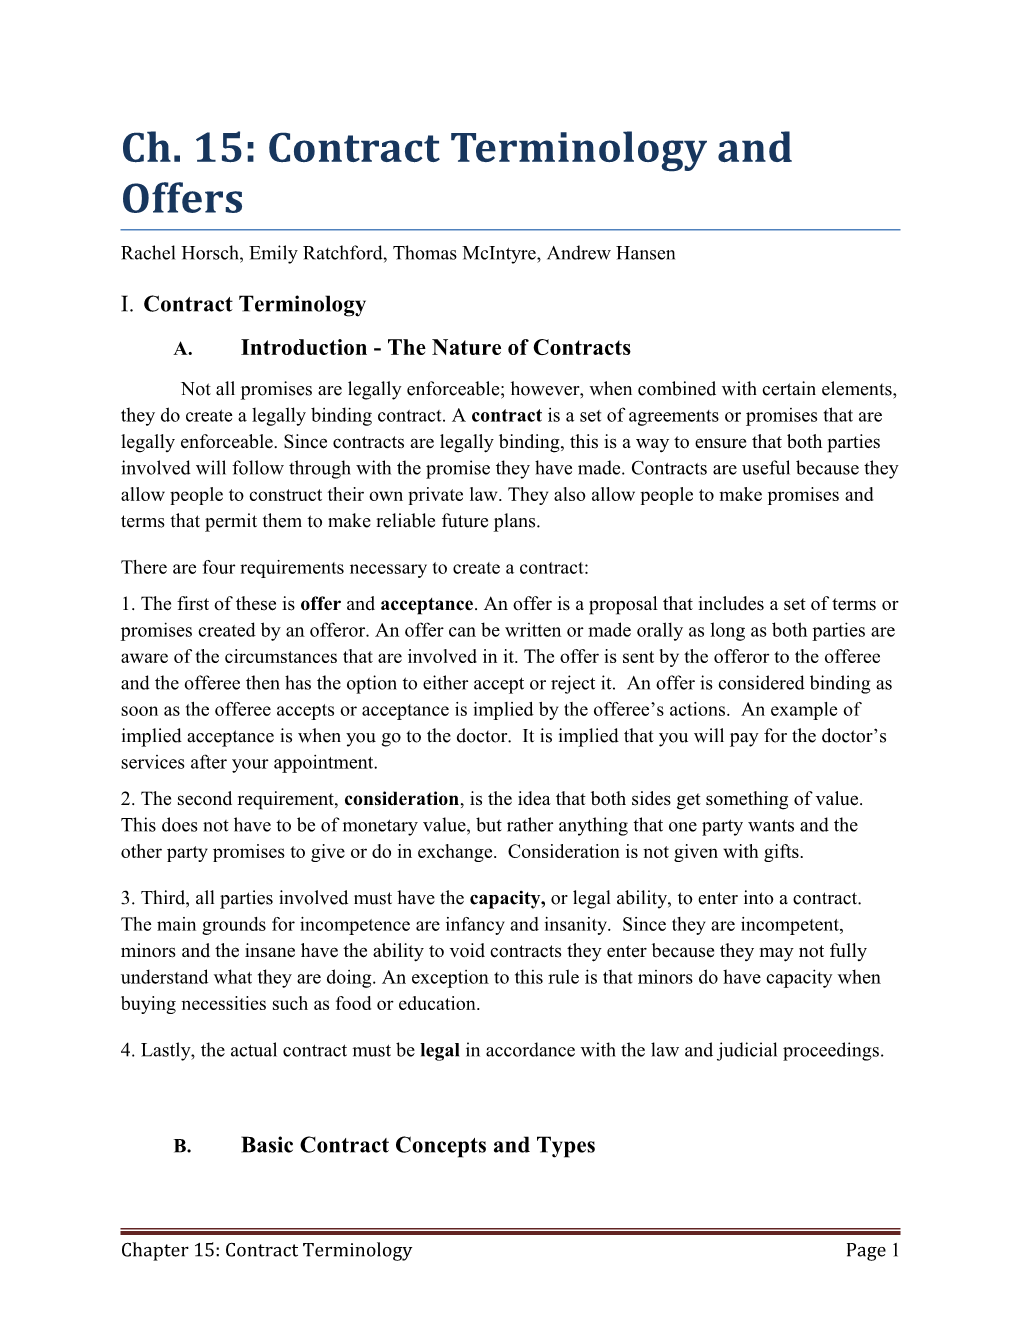 Ch. 15: Contract Terminology and Offers